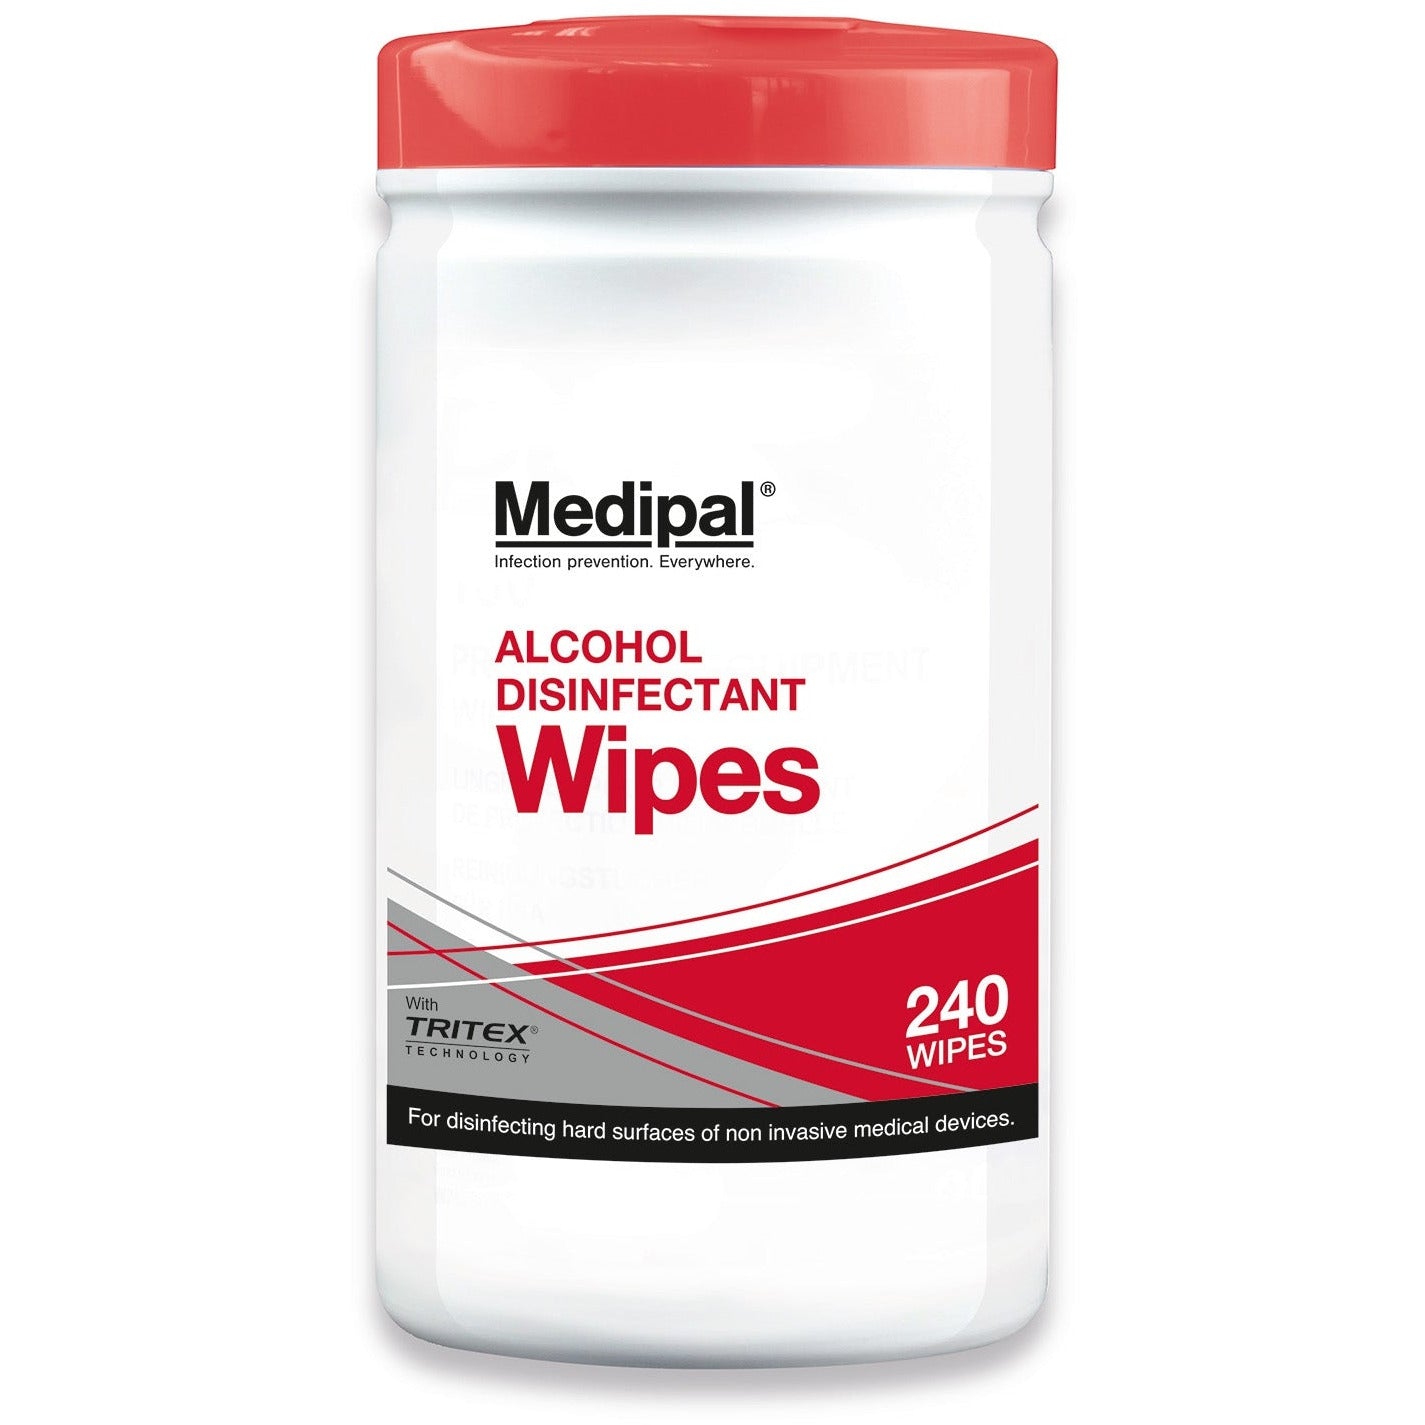 Medipal Alcohol Wipes - Pack of 240 Wipes